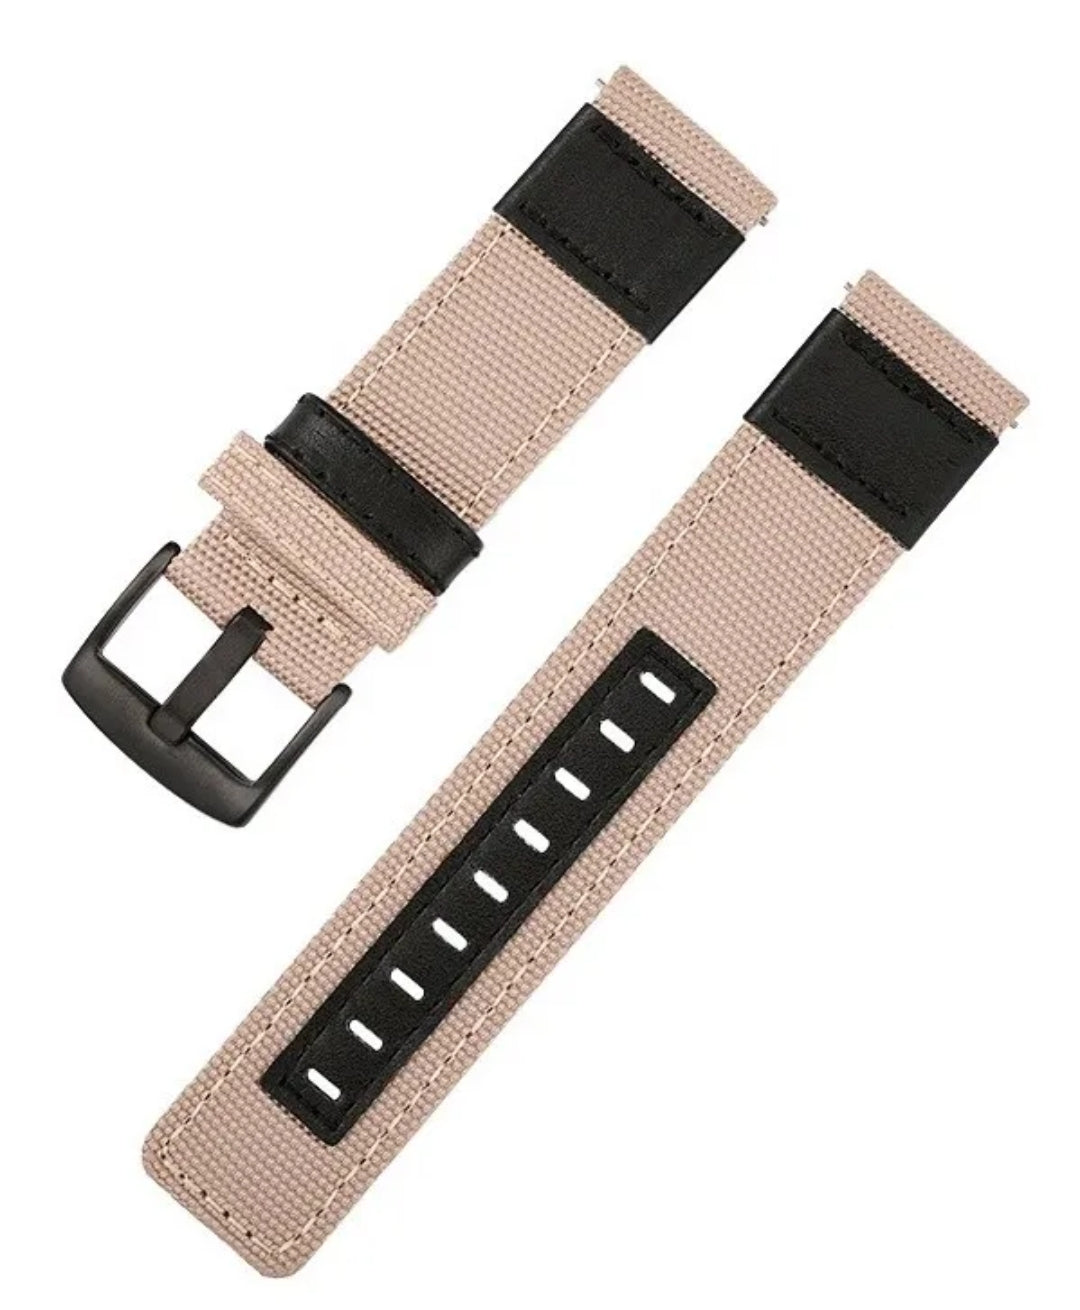 Men's beige leather/canvas combo straps 22mm option black and silver clasp